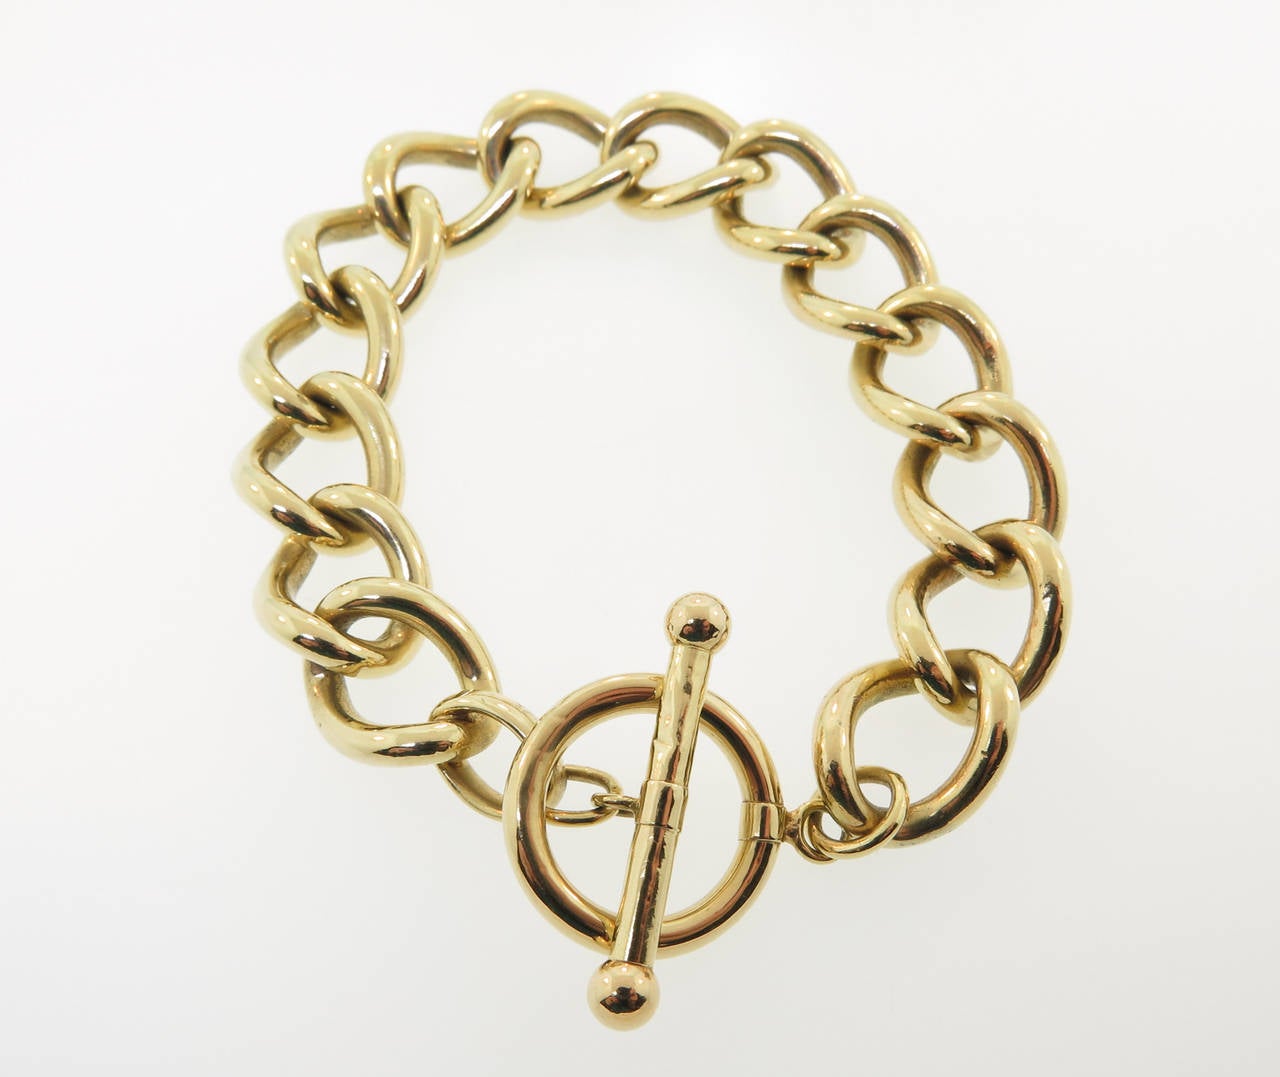 An Italian Classic iconic design bracelet is crafted out of 14k yellow gold with a toggle clasp.